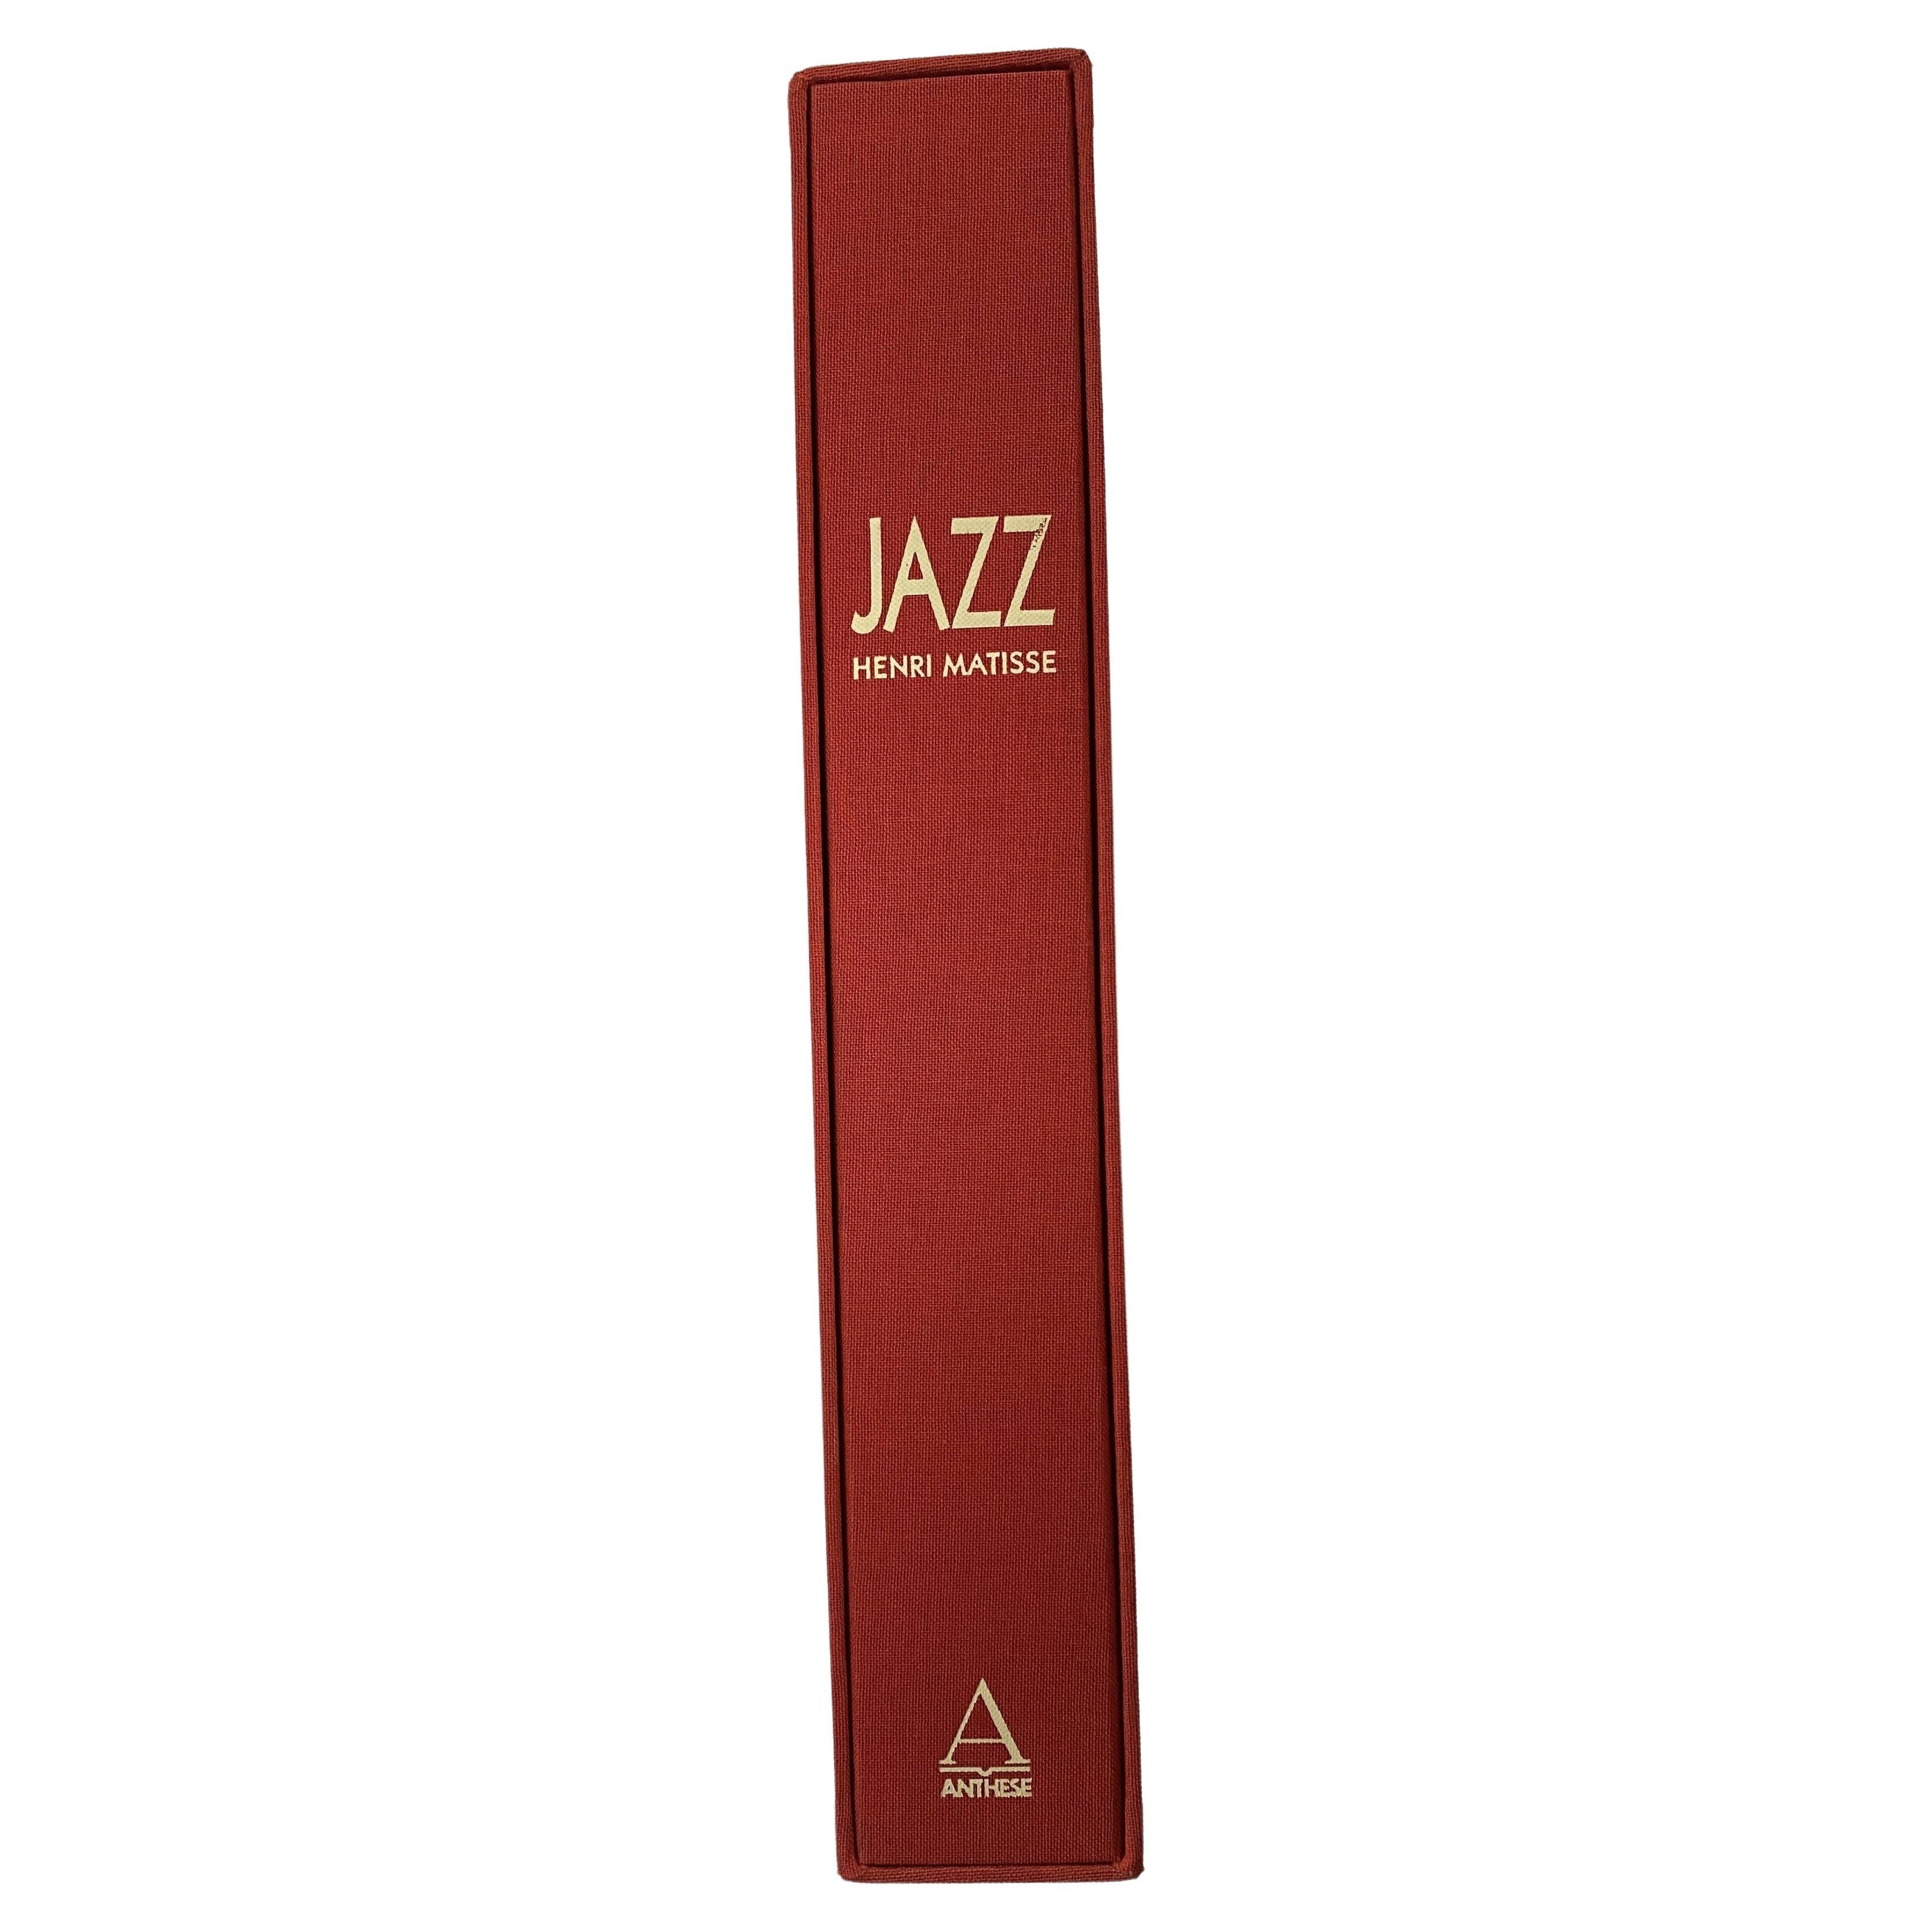 Jazz: Henri Matisse (Book)  In Excellent Condition For Sale In North Yorkshire, GB